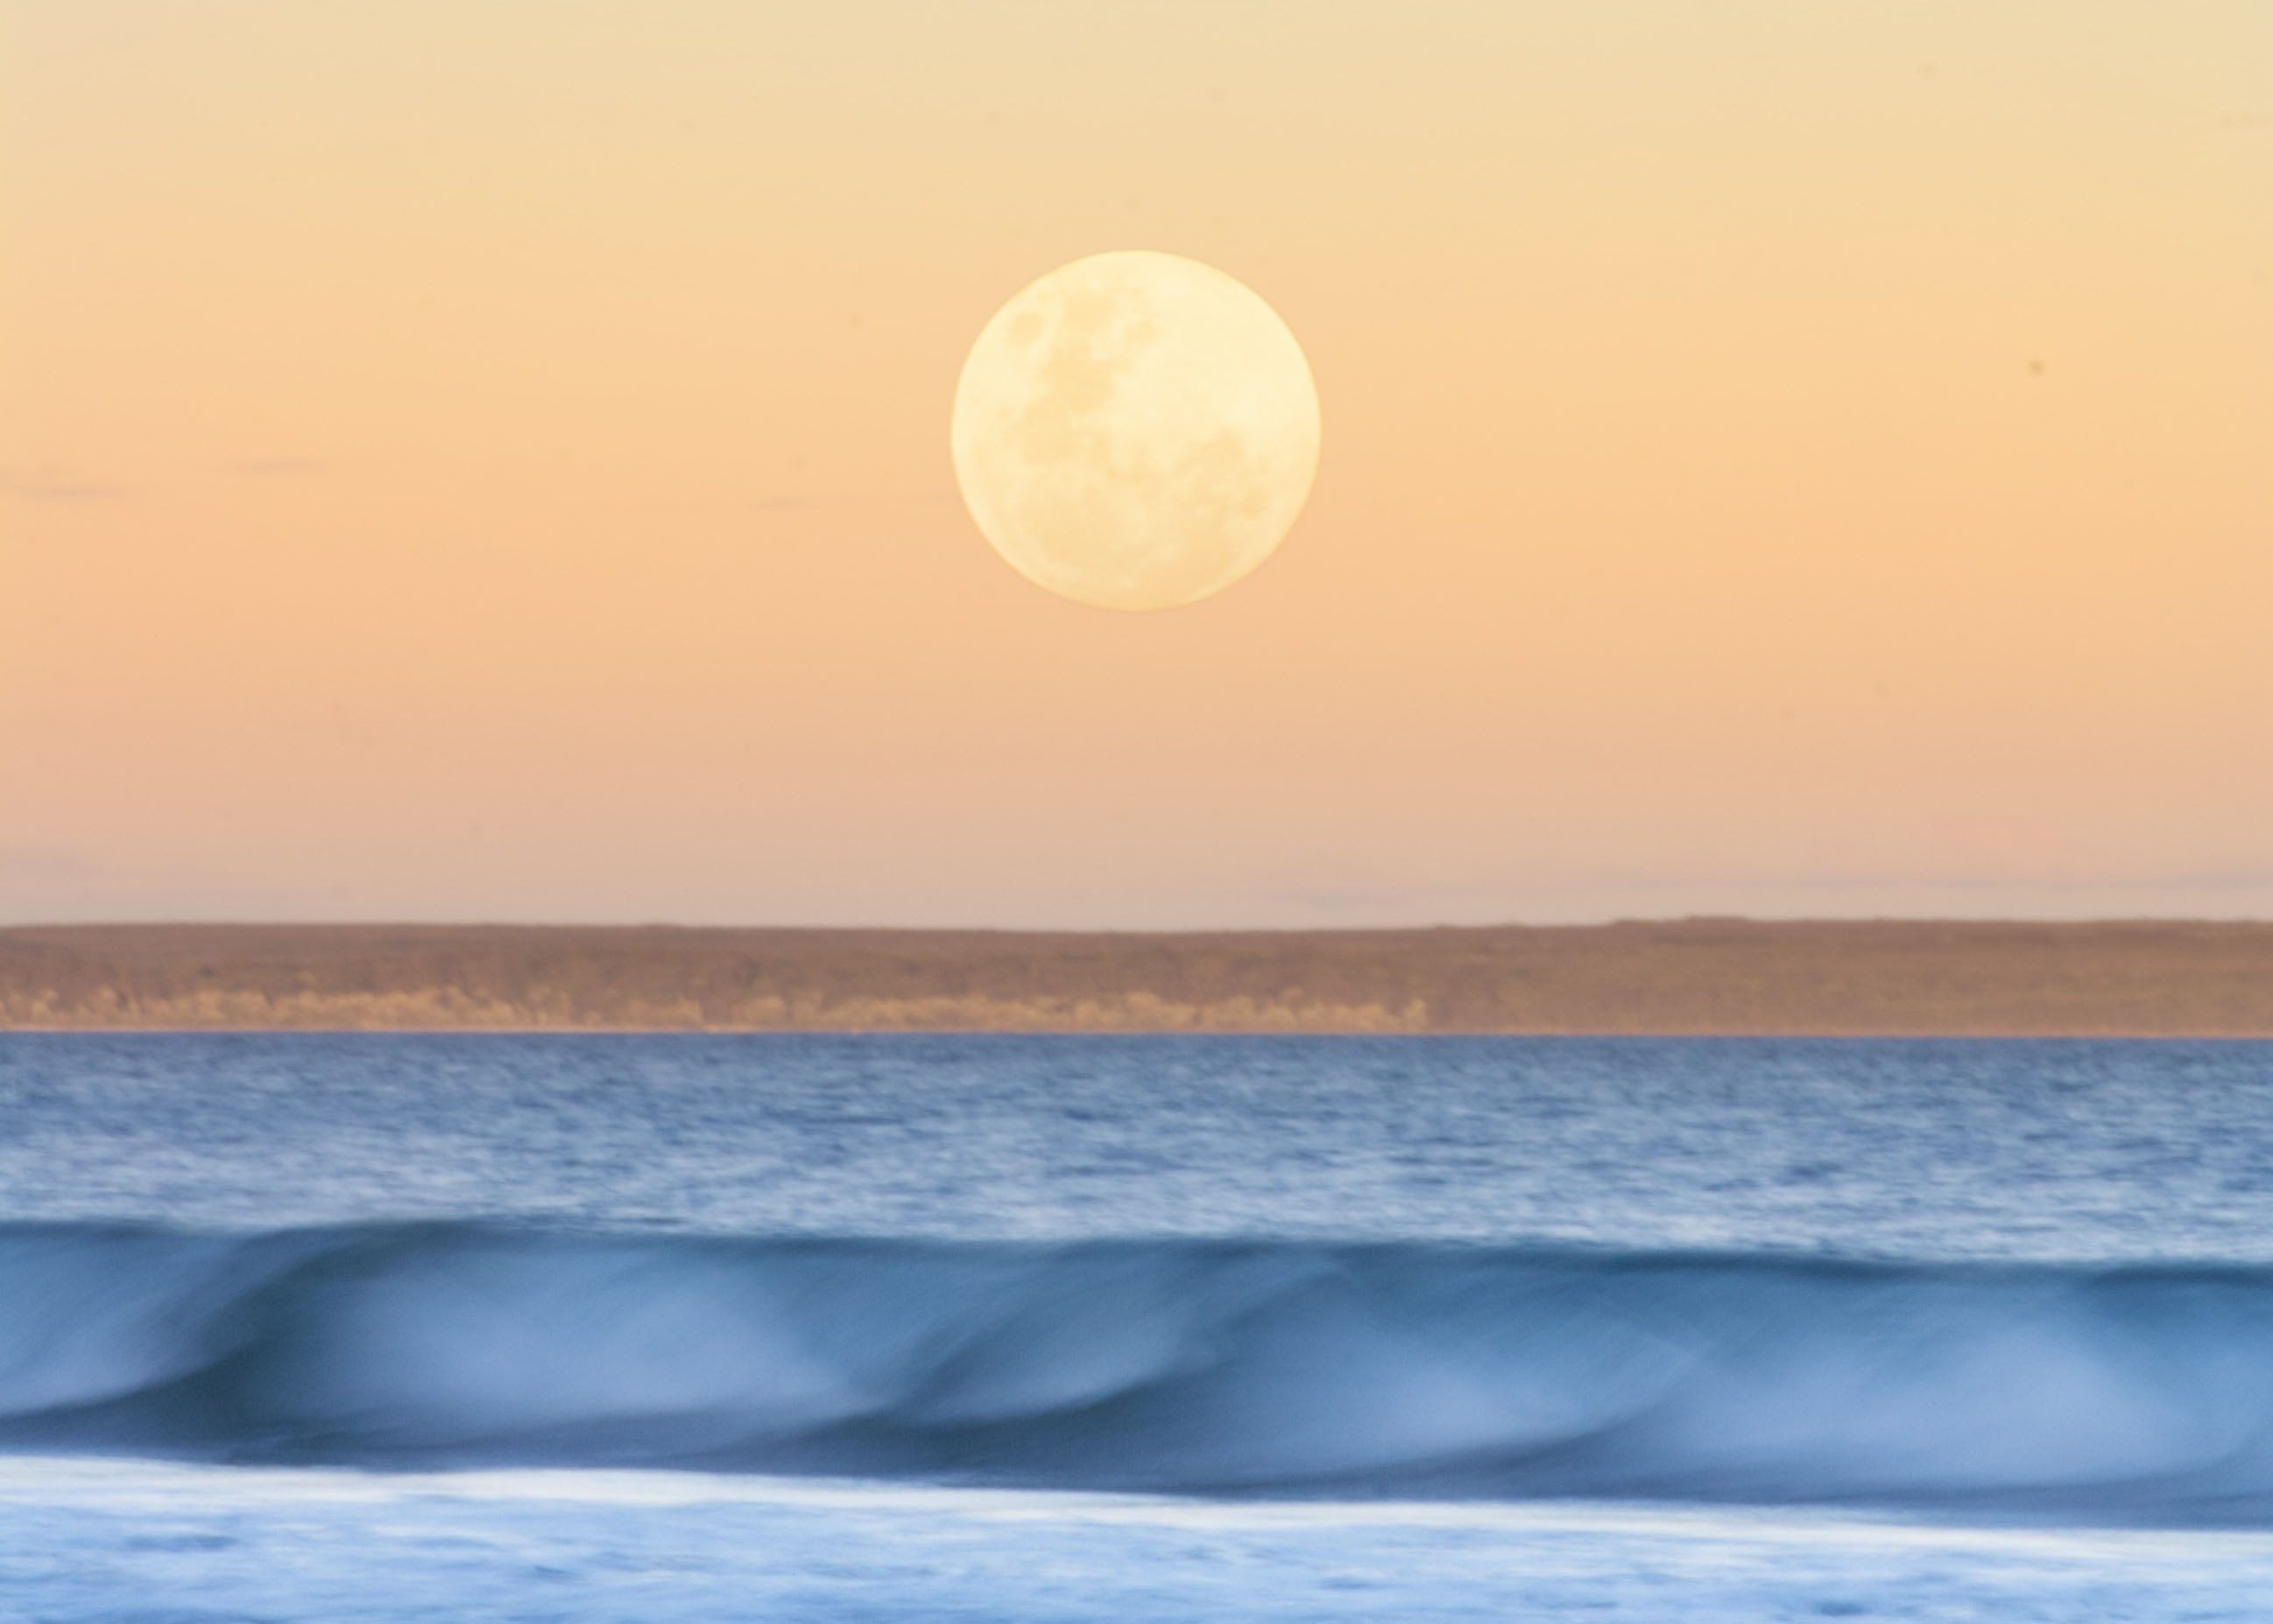 How Does The Moon Affect Our Ocean Ocean Conservancy